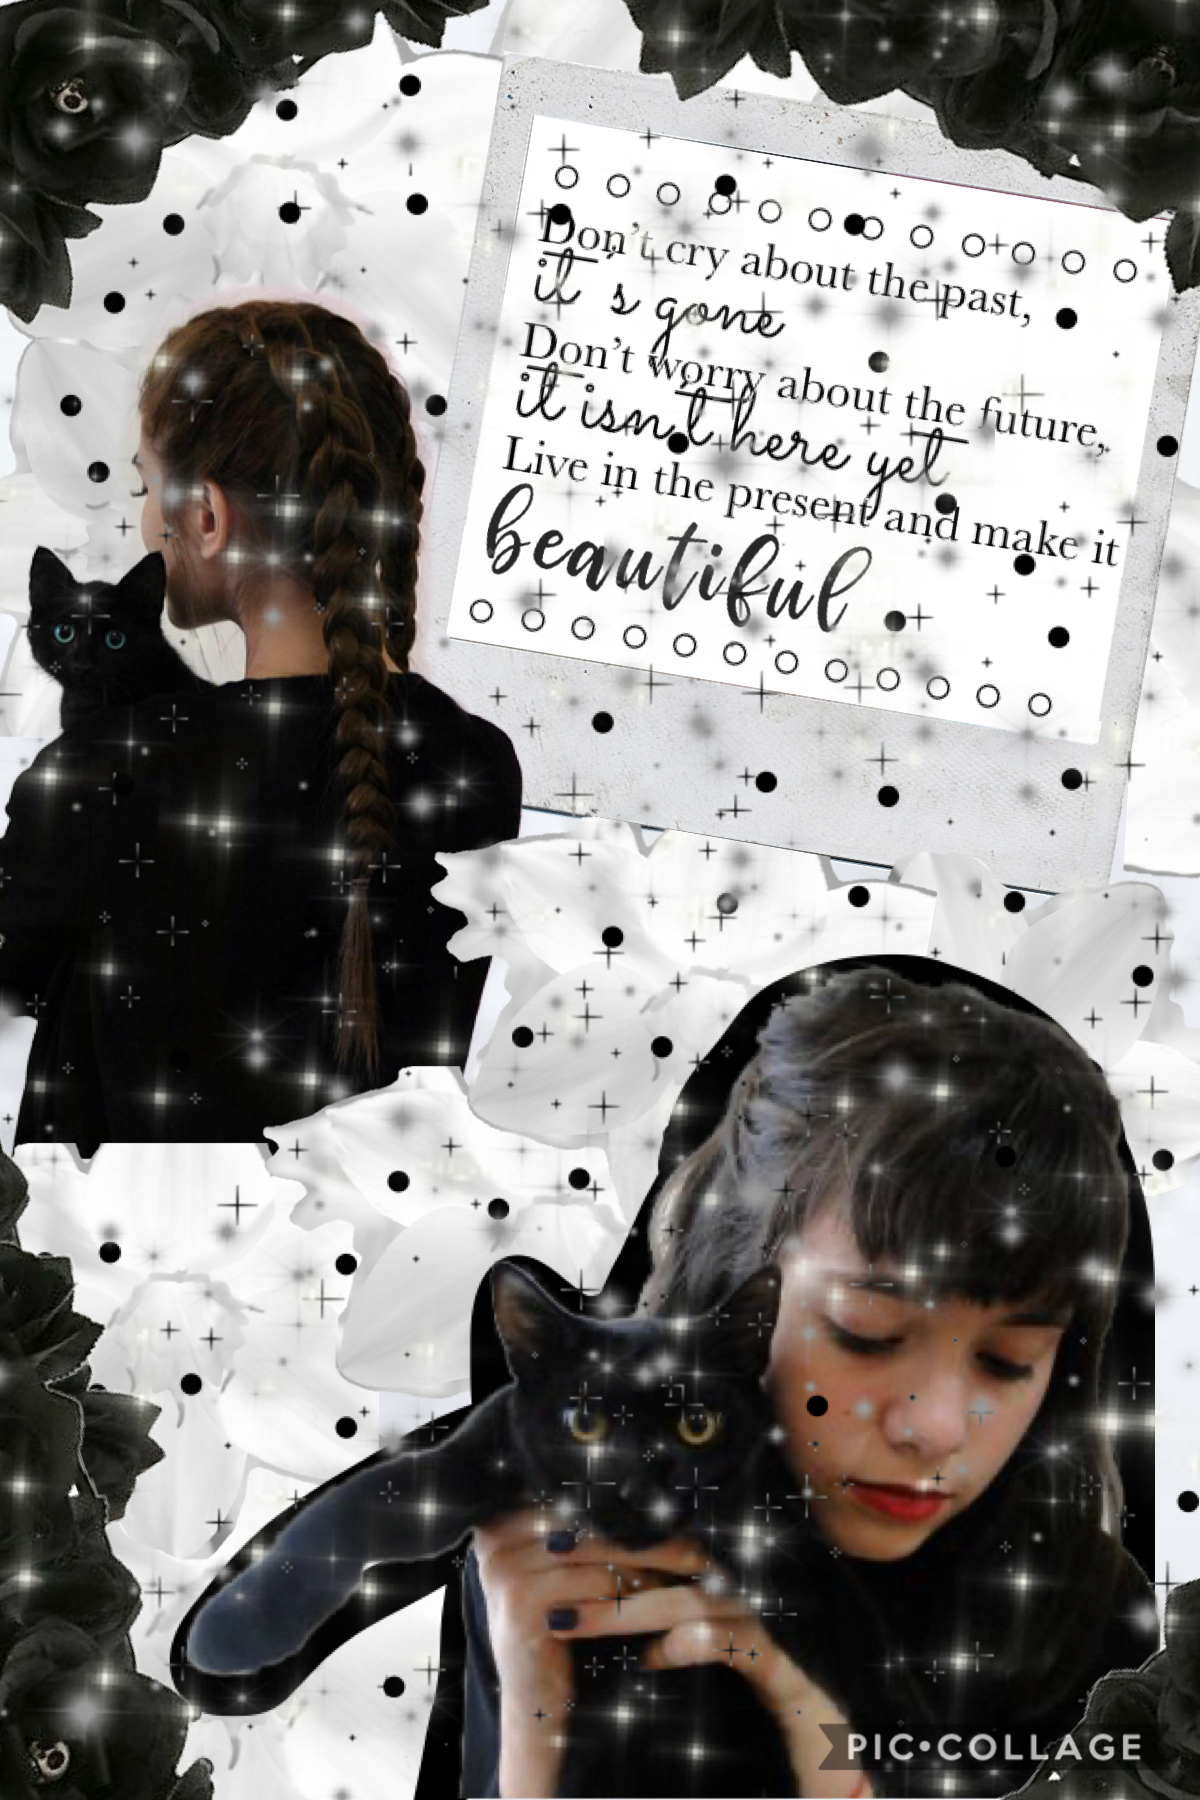 🖤-1/26/21-🖤

Oh wow an actual collage this looks lowkey terrible but ehh whatever

I’m having a new story type thing coming out soon; all credit goes to angel for the idea 😂 

How was y’all’s day